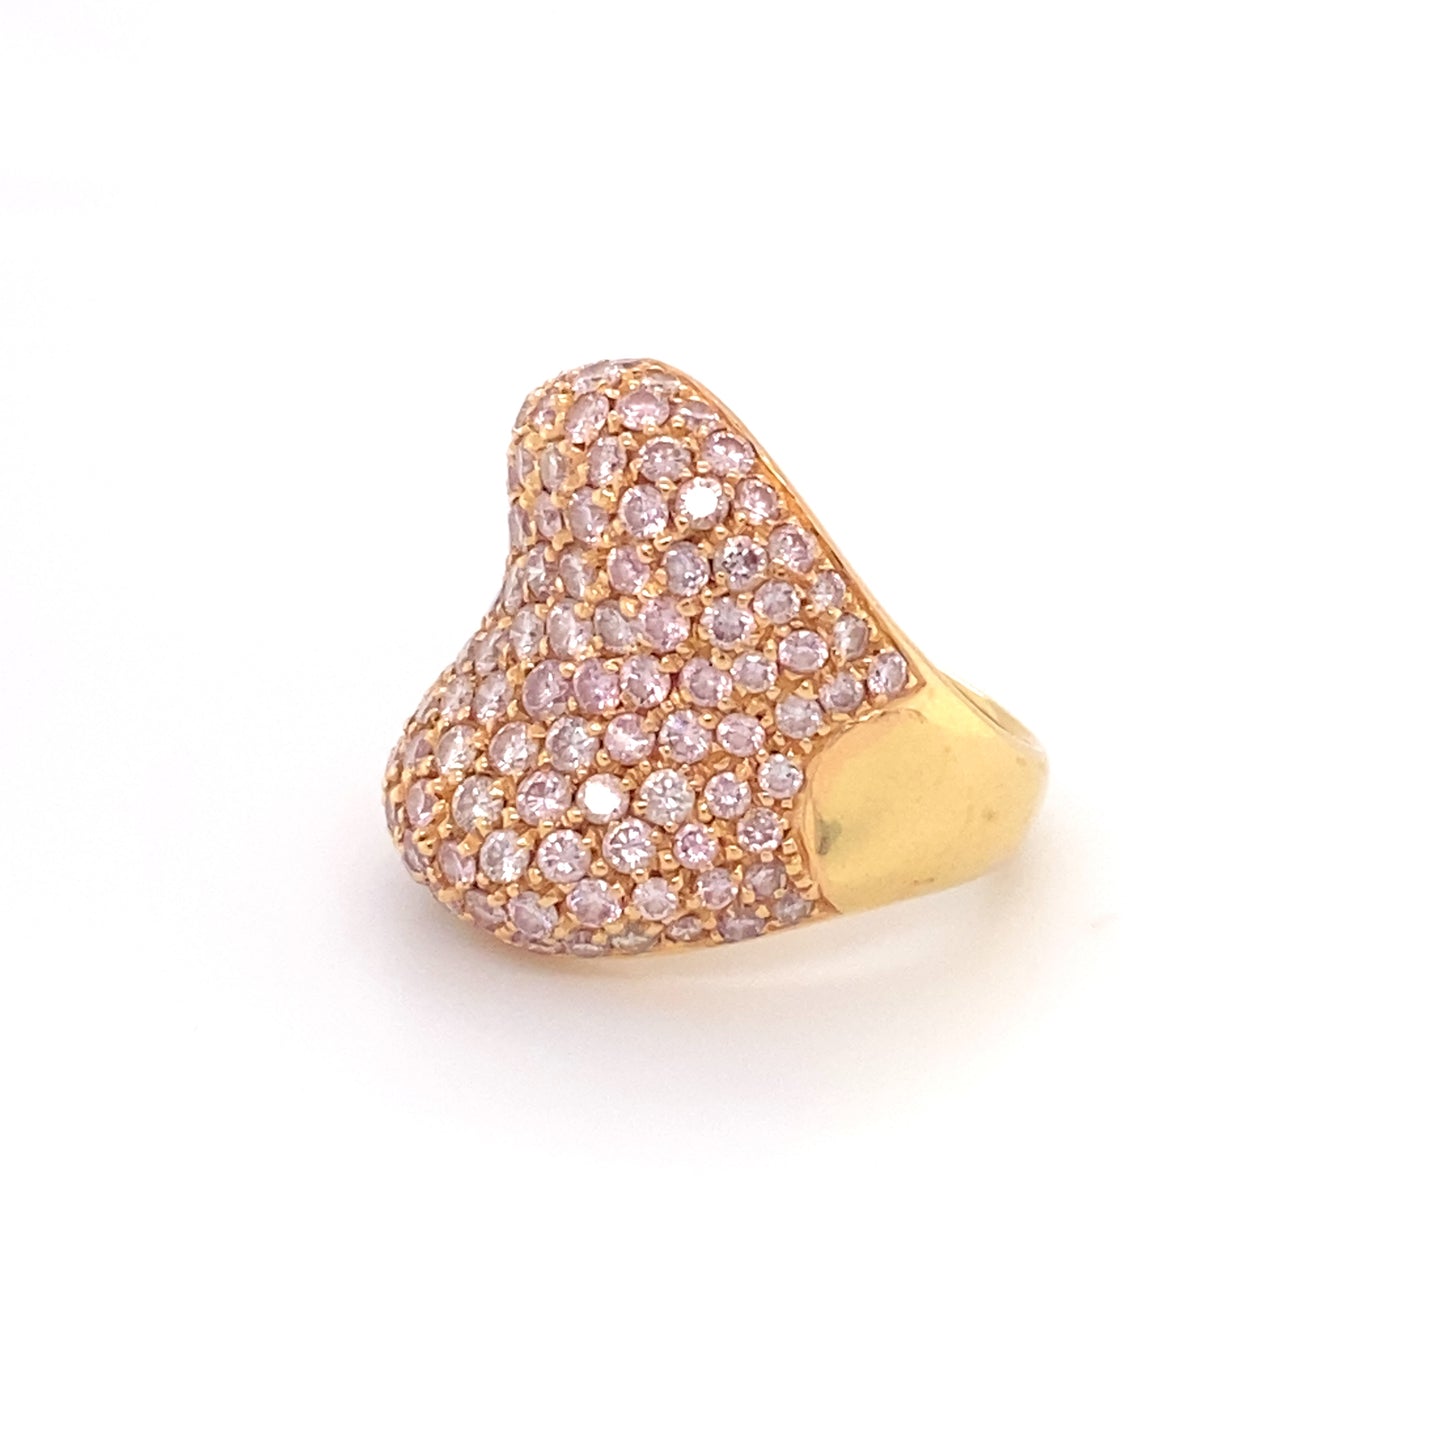 4.0 Carat Pink Diamond Concave Band in 18K Gold